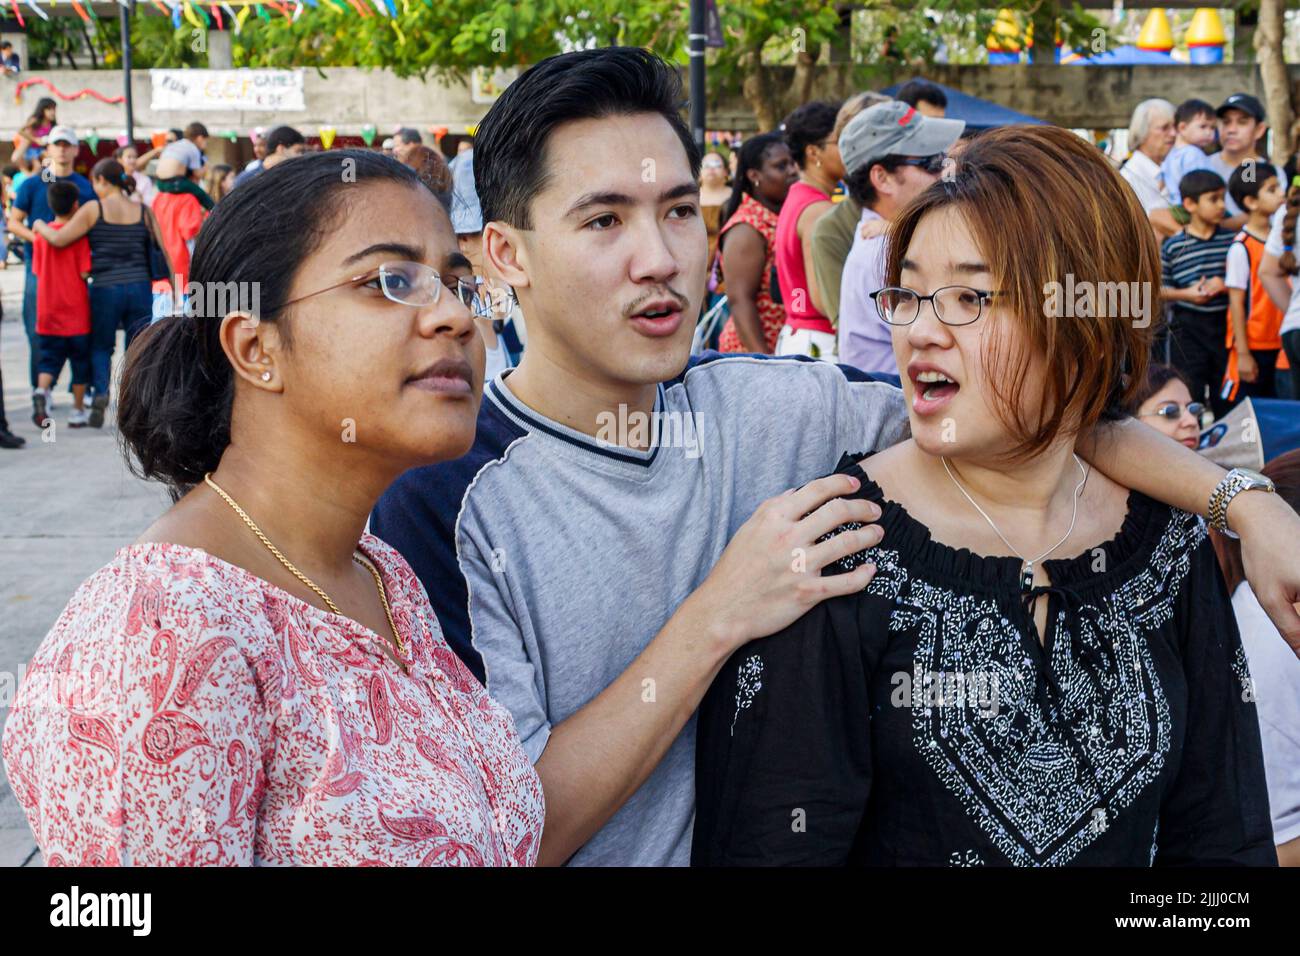 Florida Kendall,Miami Dade College,school,campus,Chinese New Year Festival festivals Asian Asians,women woman female man male friends Stock Photo